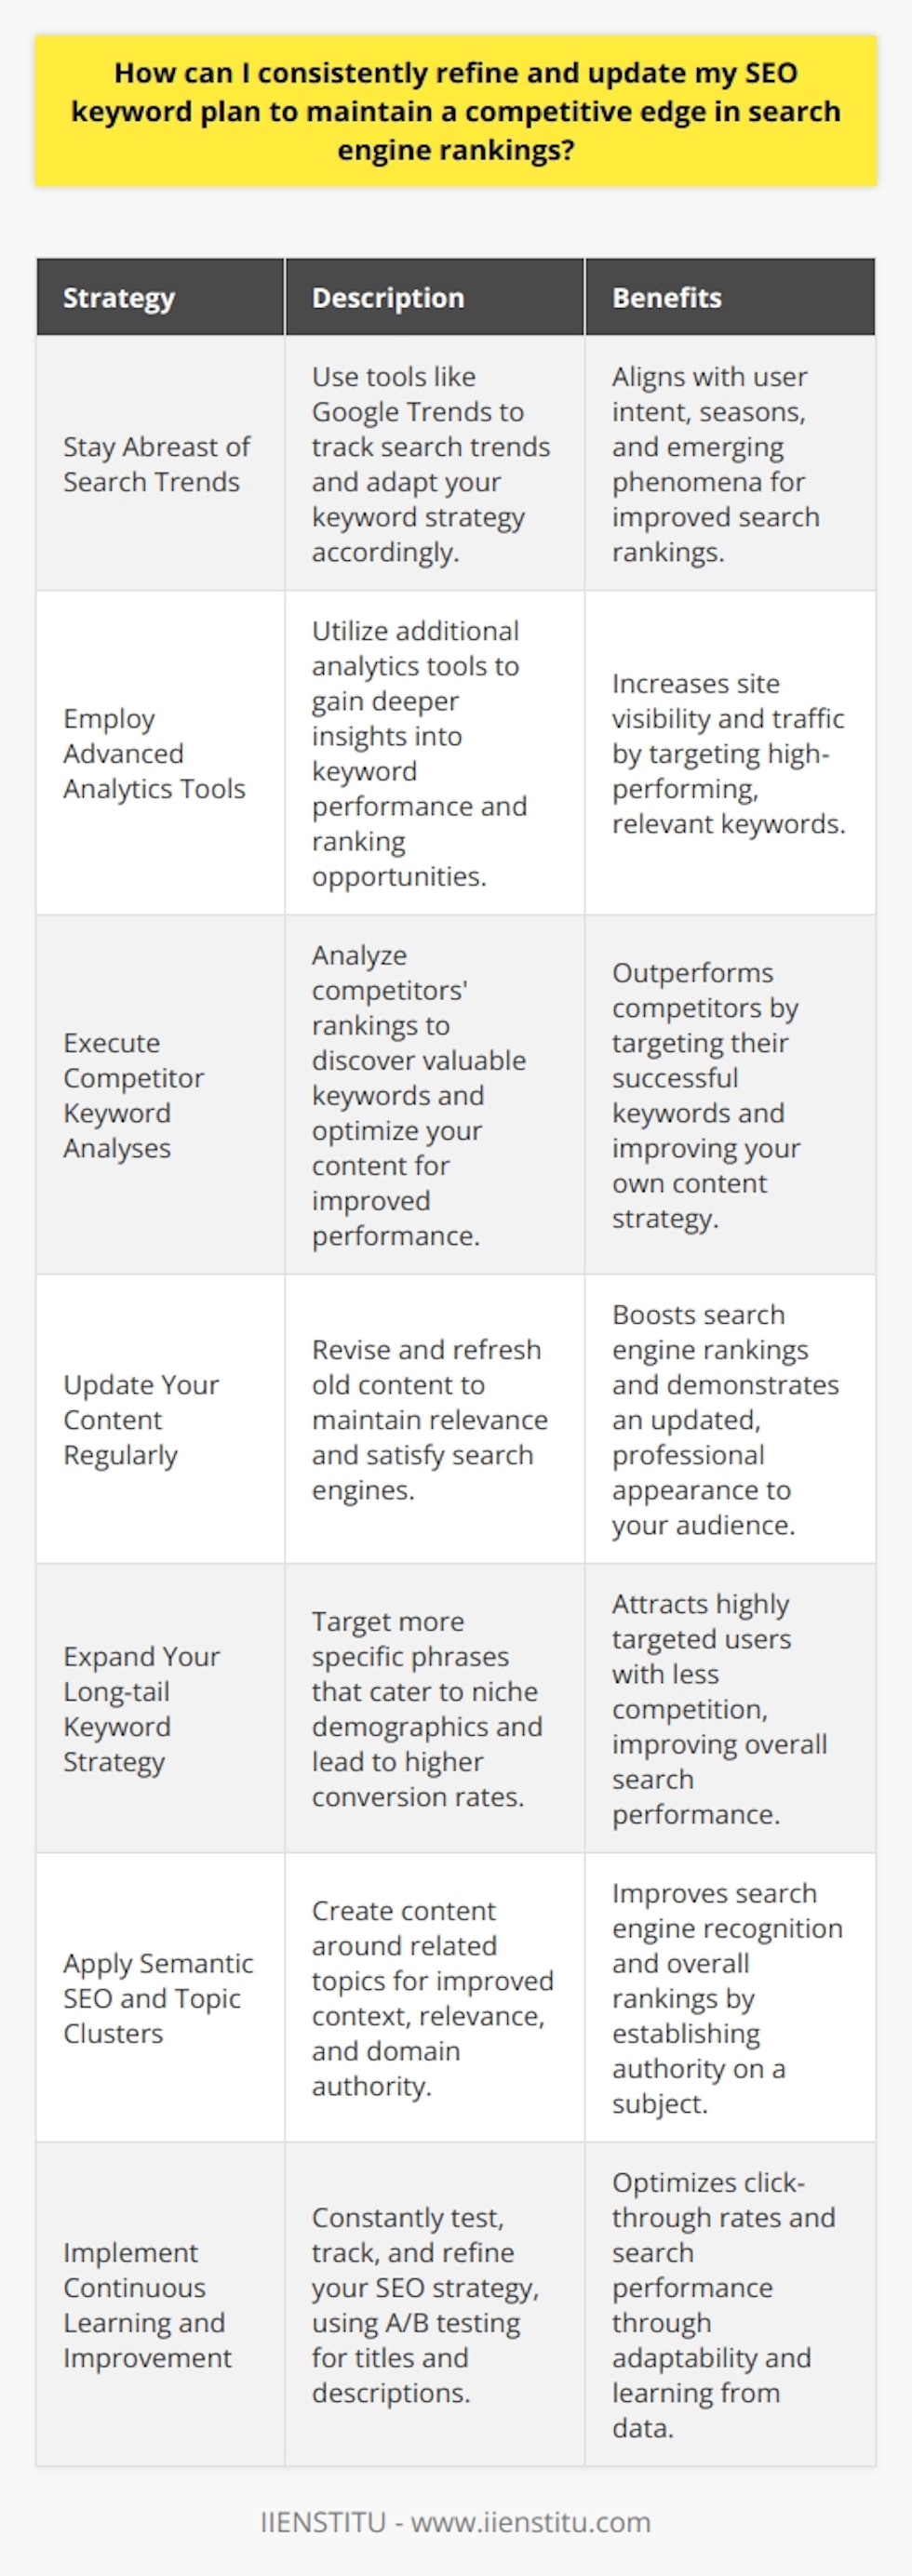 To maintain a competitive edge in search engine rankings, it's essential to continually refine and update your SEO keyword plan. The landscape of search behavior is constantly shifting, and keeping up with these developments is crucial for sustaining visibility and driving traffic to your website. Here are strategies to help you stay on top of your SEO game:1. **Stay Abreast of Search Trends**: Use tools like Google Trends to track what people are searching for and how those trends shift over time. This data can help you adapt your keyword strategy to align with user intent, seasons, and emerging phenomena.2. **Employ Advanced Analytics Tools**: While Google Analytics provides a wealth of data about how users interact with your site, complementary tools can offer deeper insights. Dive into keyword analytics to see which search terms bring users to your page, their performance metrics, and where you have opportunities to rise in the rankings.3. **Execute Competitor Keyword Analyses**: Analyzing what your competitors are ranking for is a tactical move. Tools that offer competitive insights can reveal new, valuable keywords to target. Consider how you can optimize your content and meta tags to outperform competitors for those terms.4. **Update Your Content Regularly**: Search engines favor fresh, relevant content. Ensure your site stays current by reviewing and updating old posts, articles, and website pages. This not only satisfies search engines but also presents an updated face to your audience.5. **Expand Your Long-tail Keyword Strategy**: Long-tail keywords, which are more specific phrases, cater to niche demographics and lead to higher conversion rates. These keywords are less competitive yet highly targeted, enabling you to reach the users most interested in your specific offer or content.6. **Apply Semantic SEO and Topic Clusters**: Search engines are increasingly focusing on context and relevance. By building out content around topic clusters, you can create a web of information on your site that search engines recognize as authoritative on a subject, improving overall domain authority and rankings.7. **Implement Continuous Learning and Improvement**: SEO is not a one-time task but a continuous cycle. Keep testing different approaches, track your results, and refine your keyword strategy constantly. Utilize A/B testing for your page titles and meta descriptions to increase click-through rates from search results.By committing to a dynamic and strategic approach to your SEO keyword planning, you ensure that your content stays relevant and prominent in the ever-evolving digital landscape. Remember that SEO is a long-term endeavor, and the key to success is adaptability, vigilance, and an ongoing willingness to learn and improve.